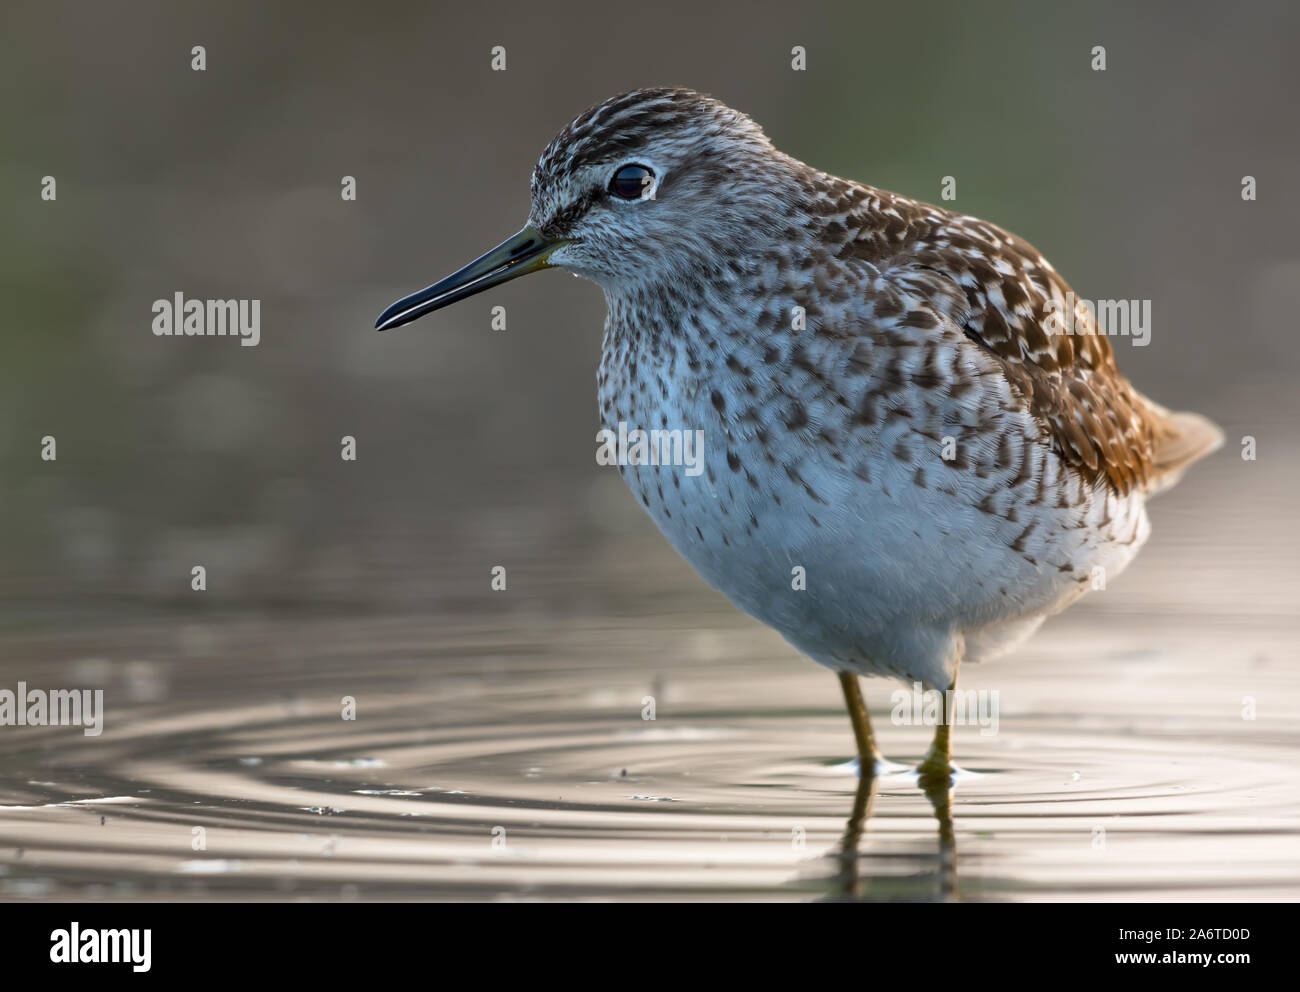 Close and Big photo of Wood sandpiper resting in water with circles on surface Stock Photo